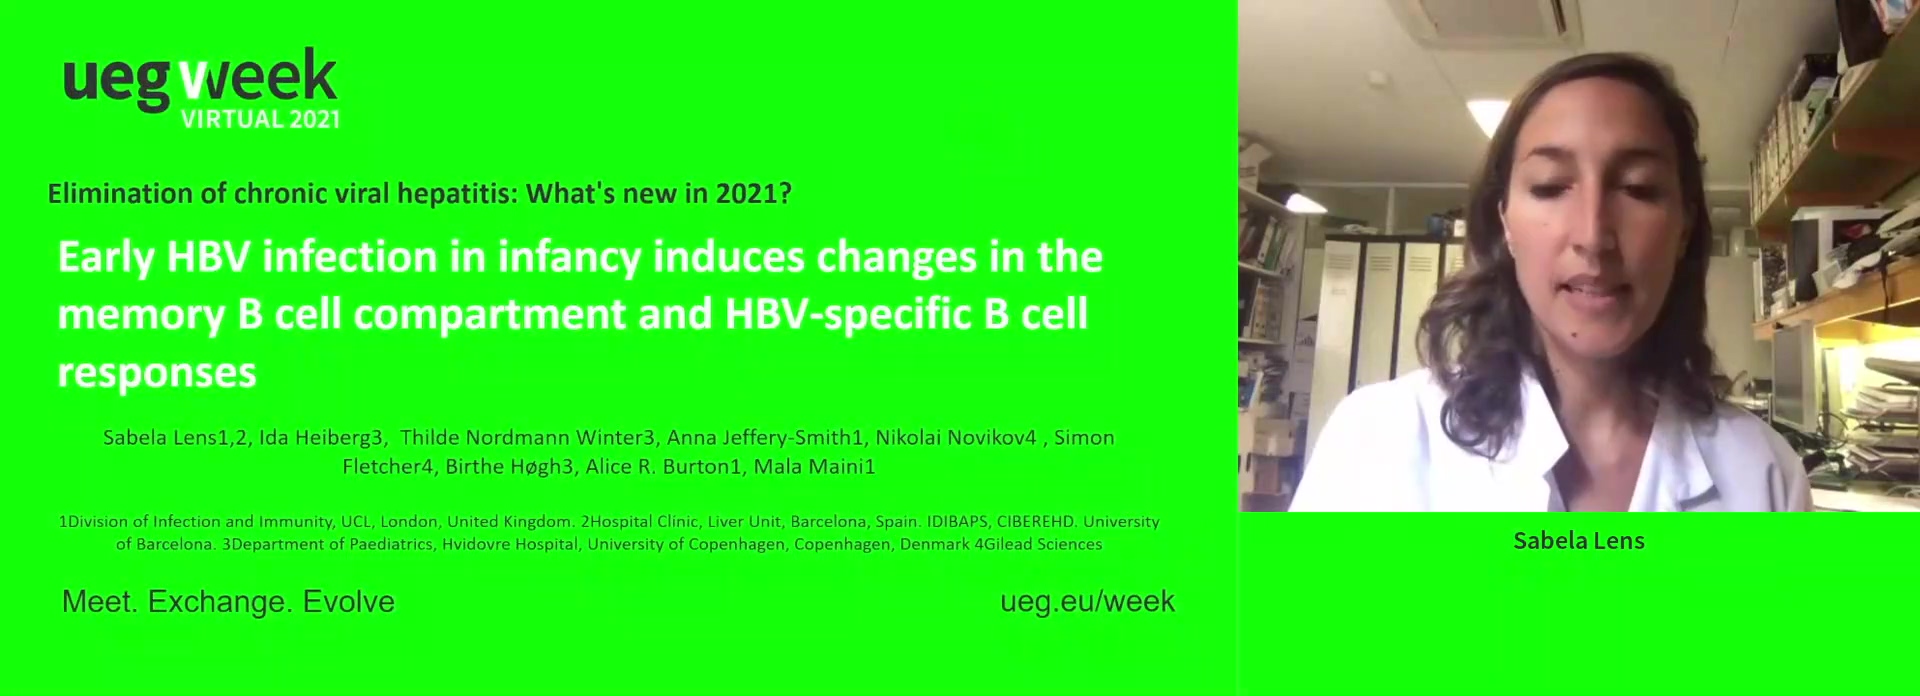 Early HBV infection in infancy induces changes in the memory B cell compartment and HBV-specific B cell responses